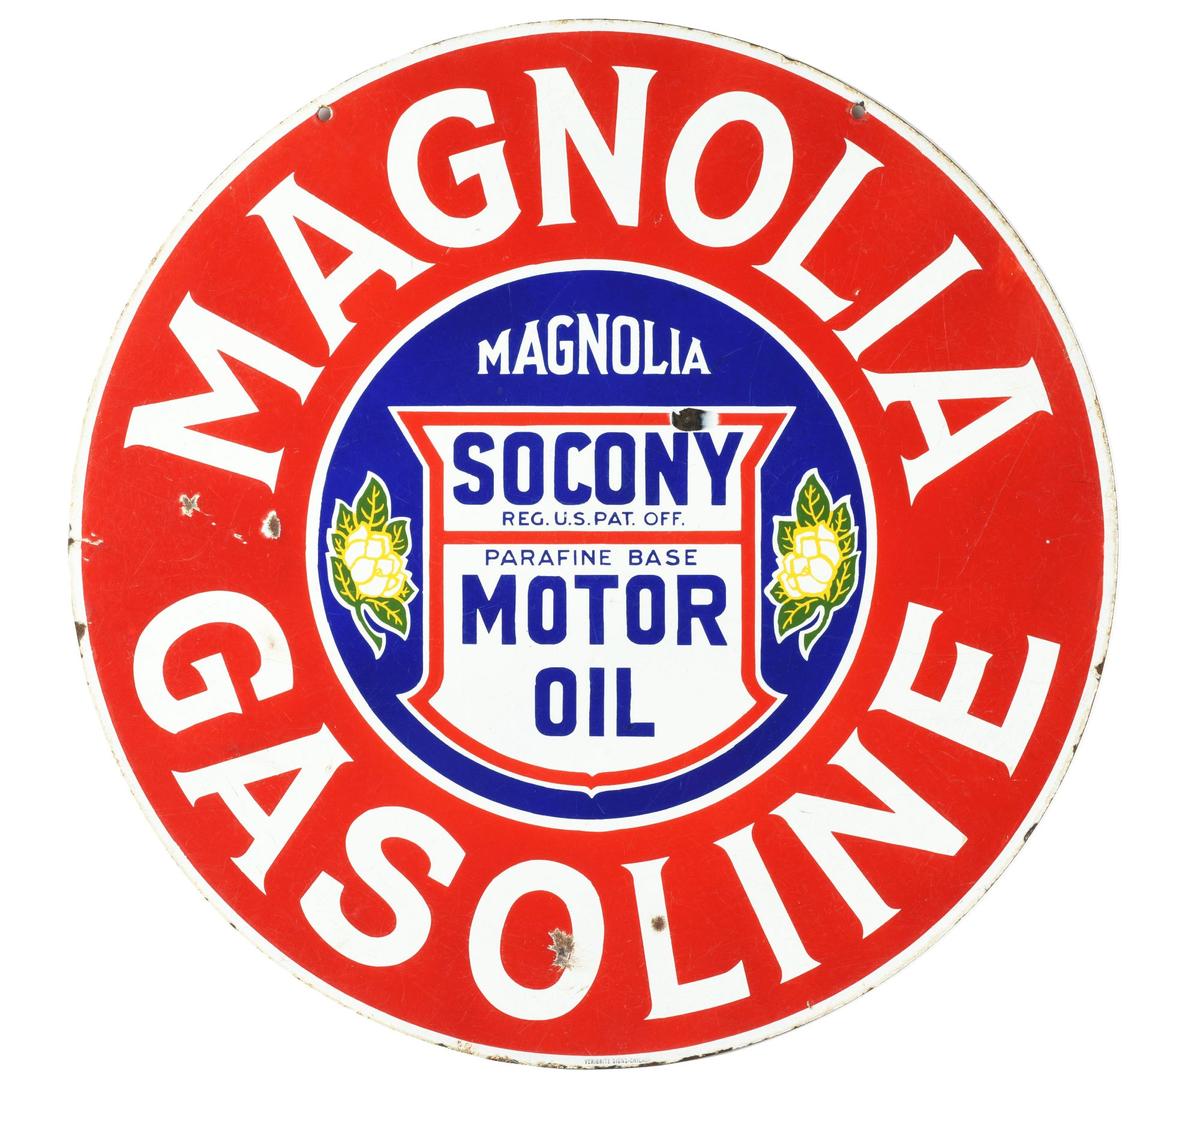 Rare Magnolia Gasoline & Socony Motor Oil Porcelain Curb Sign with Socony Shield Graphic.